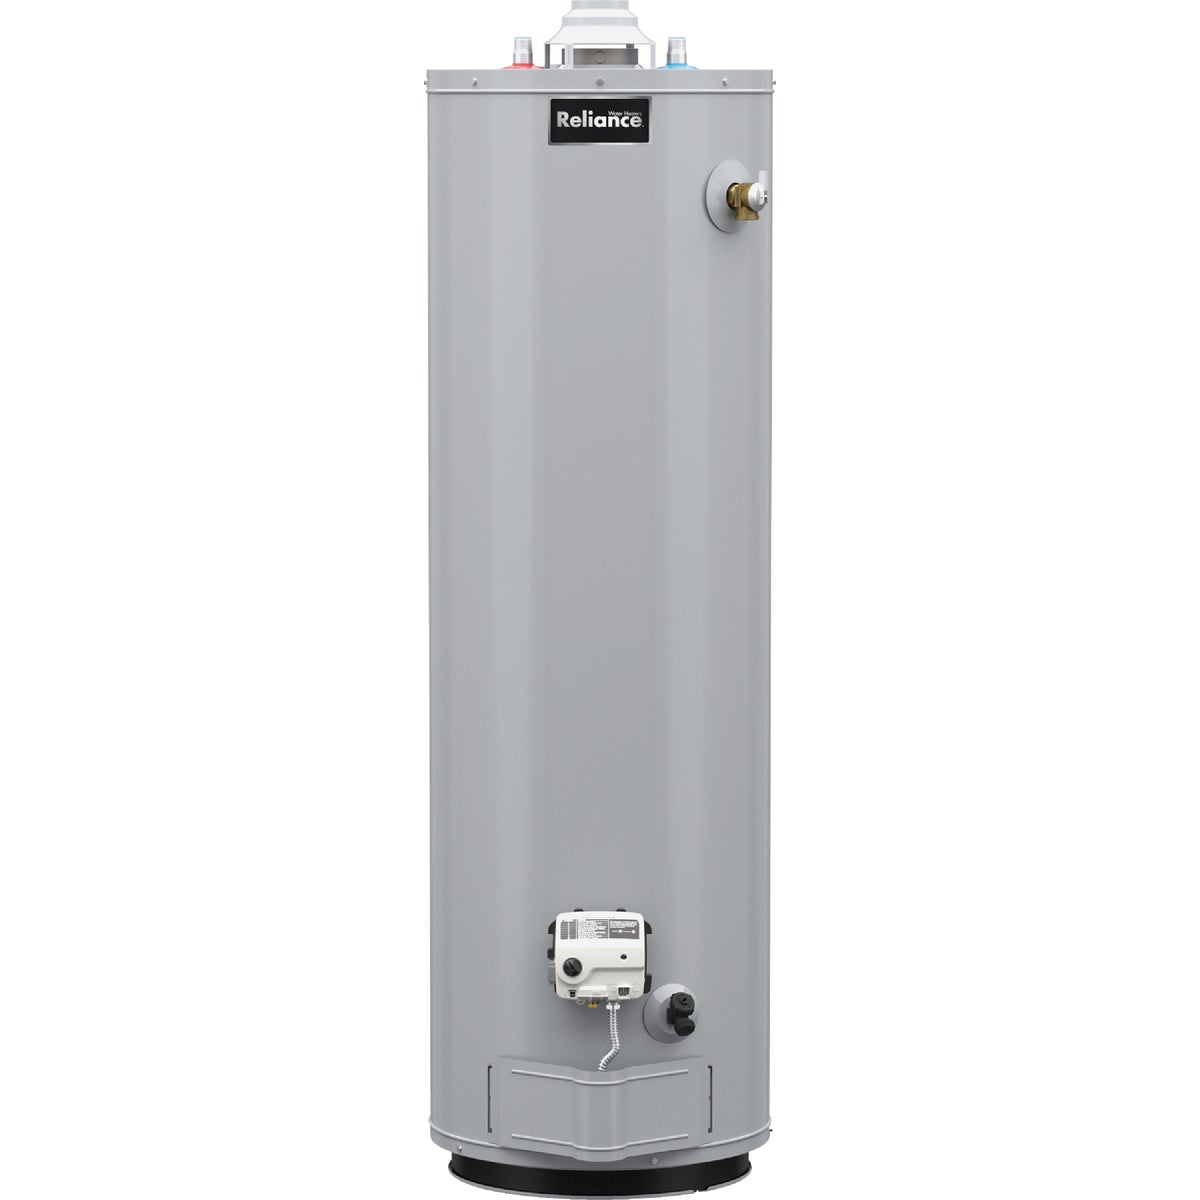 Item 401903, Ultra low NOx natural gas water heater. 1 In. insulation.